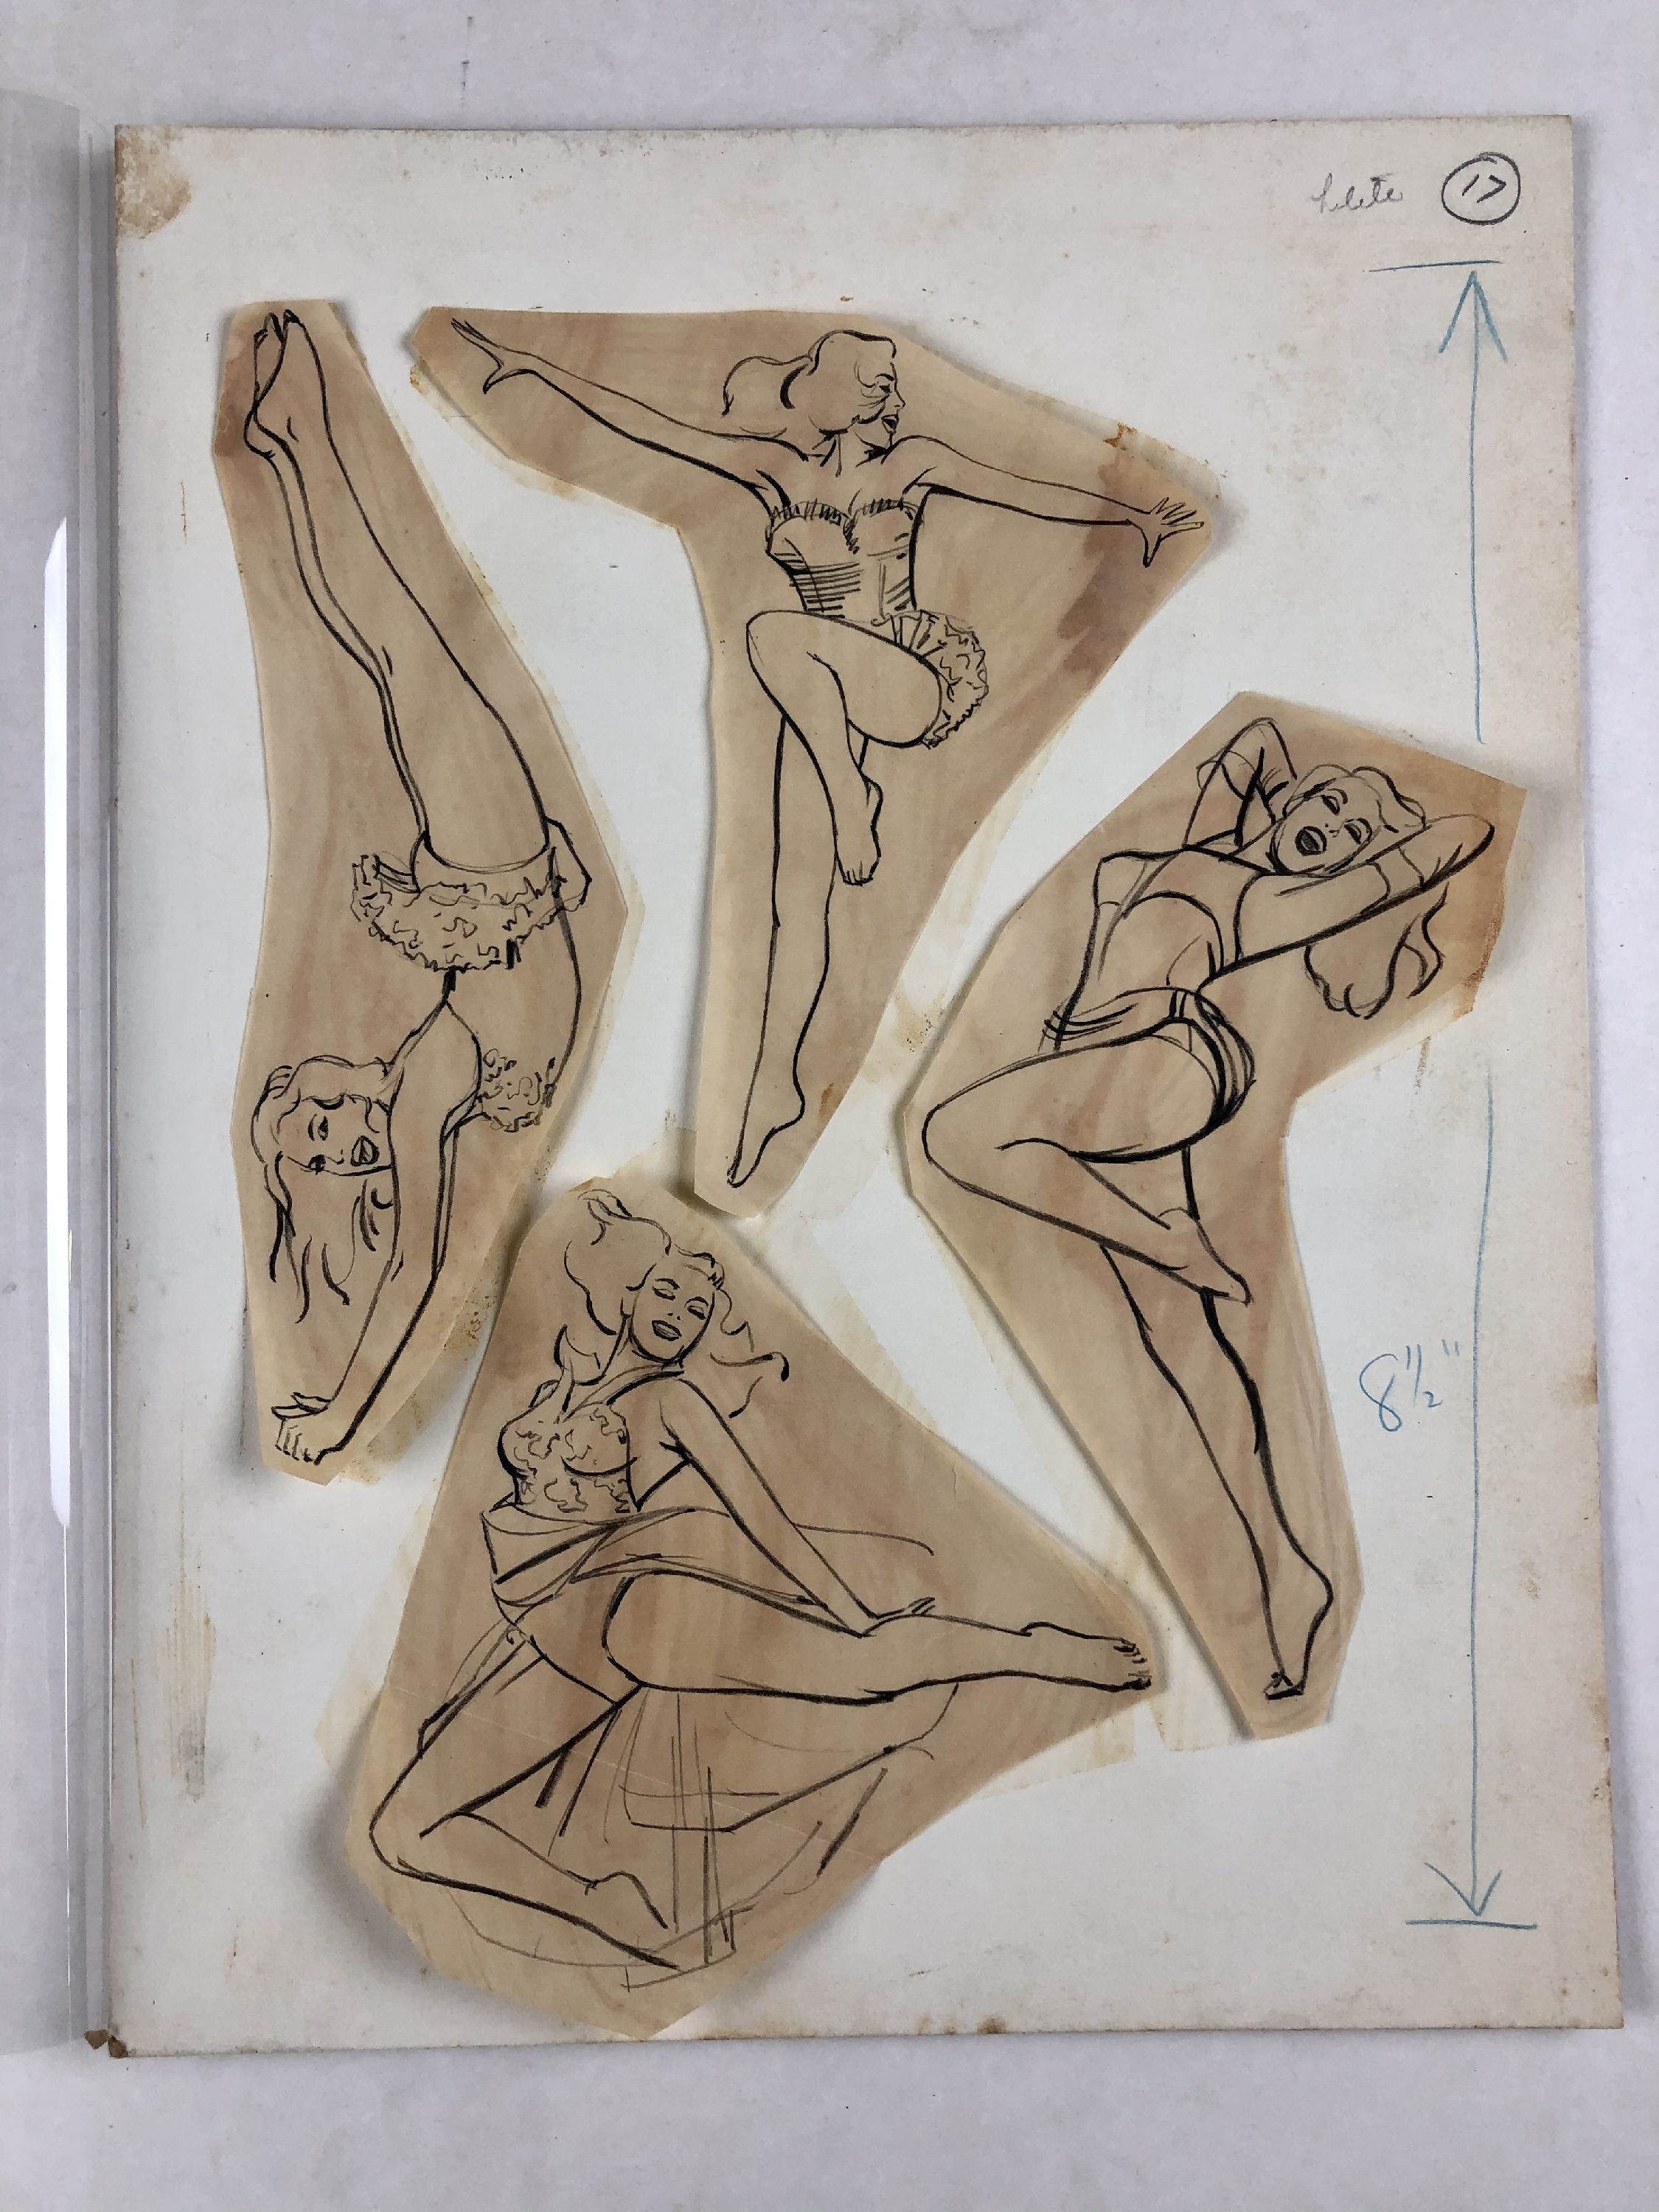 4 cutouts of charcoal sketches on onion skin featuring woman dancing